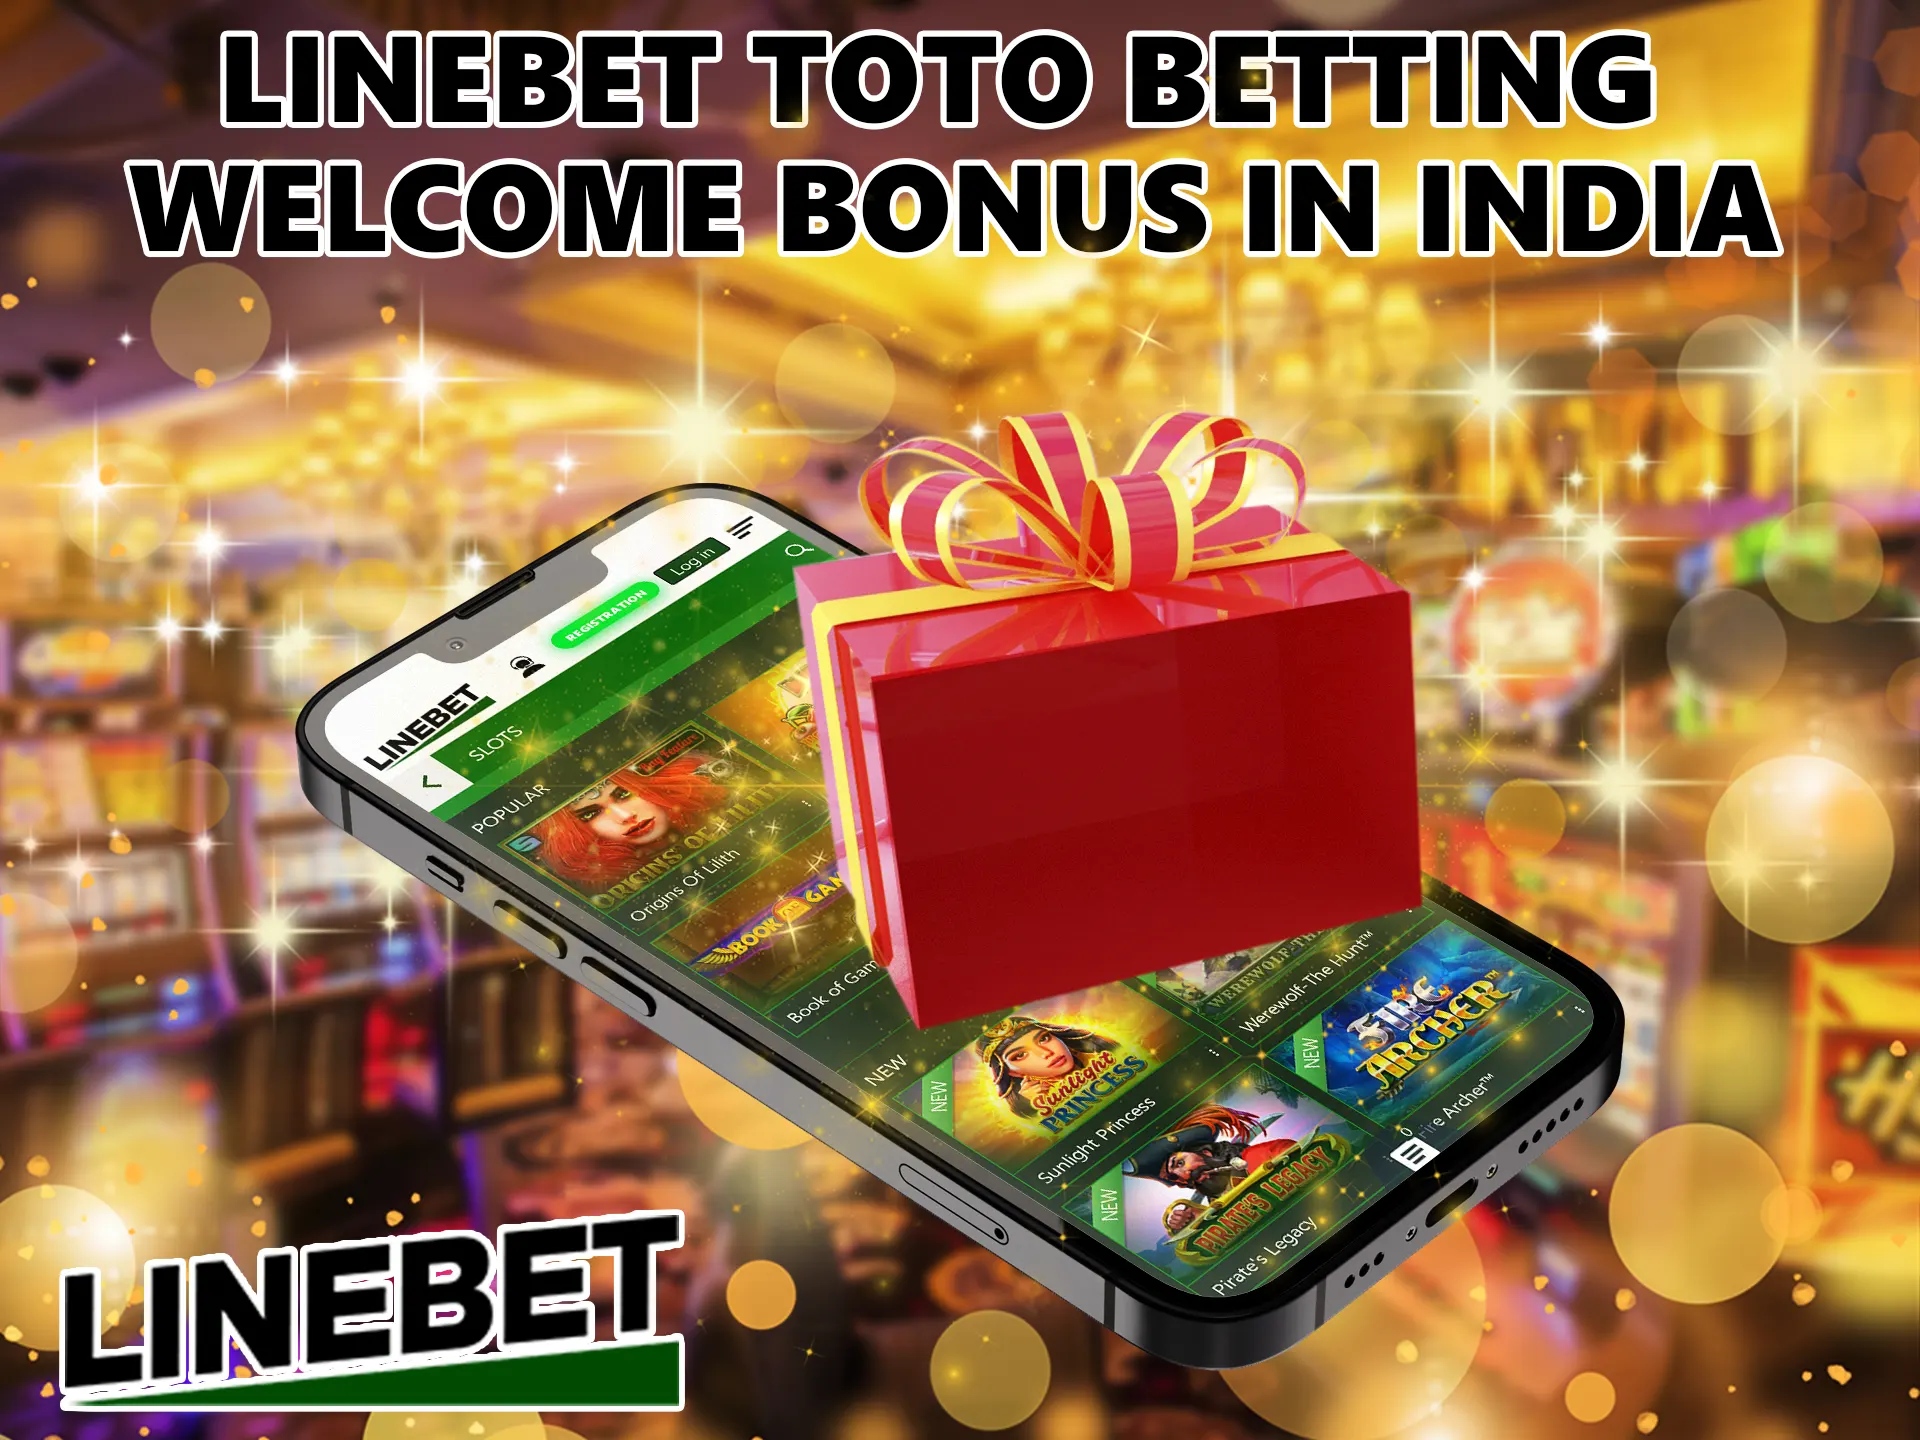 After registering, every player will receive a nice compliment from the company to their Linebet account.